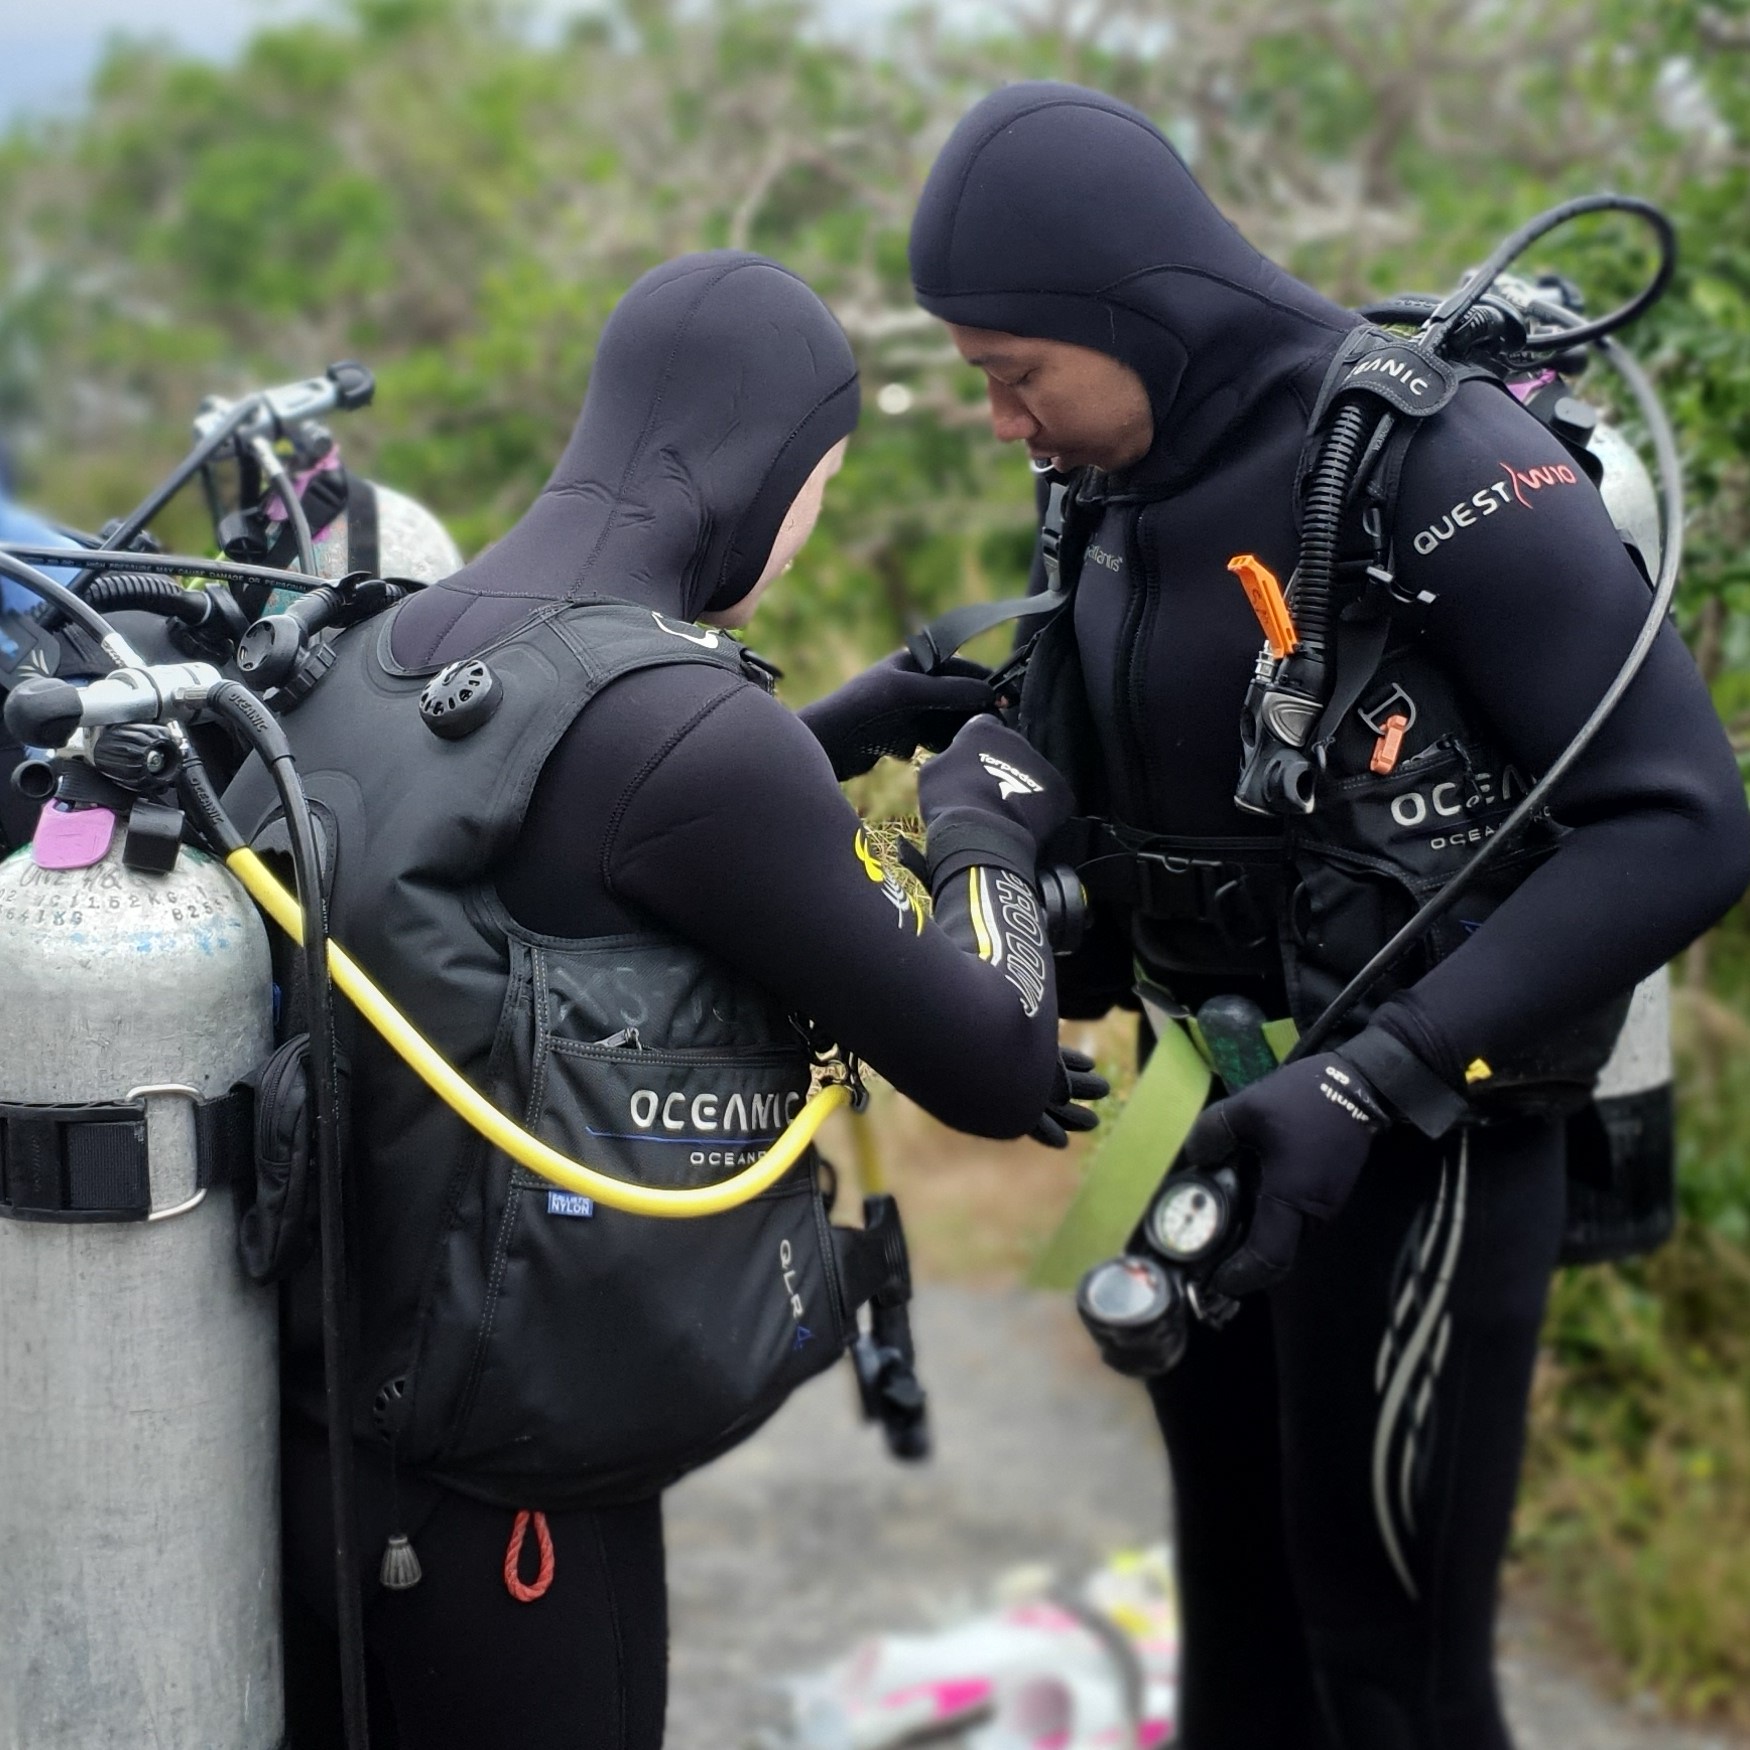 2 PADI Open Water Divers performing their pre-dive safety check